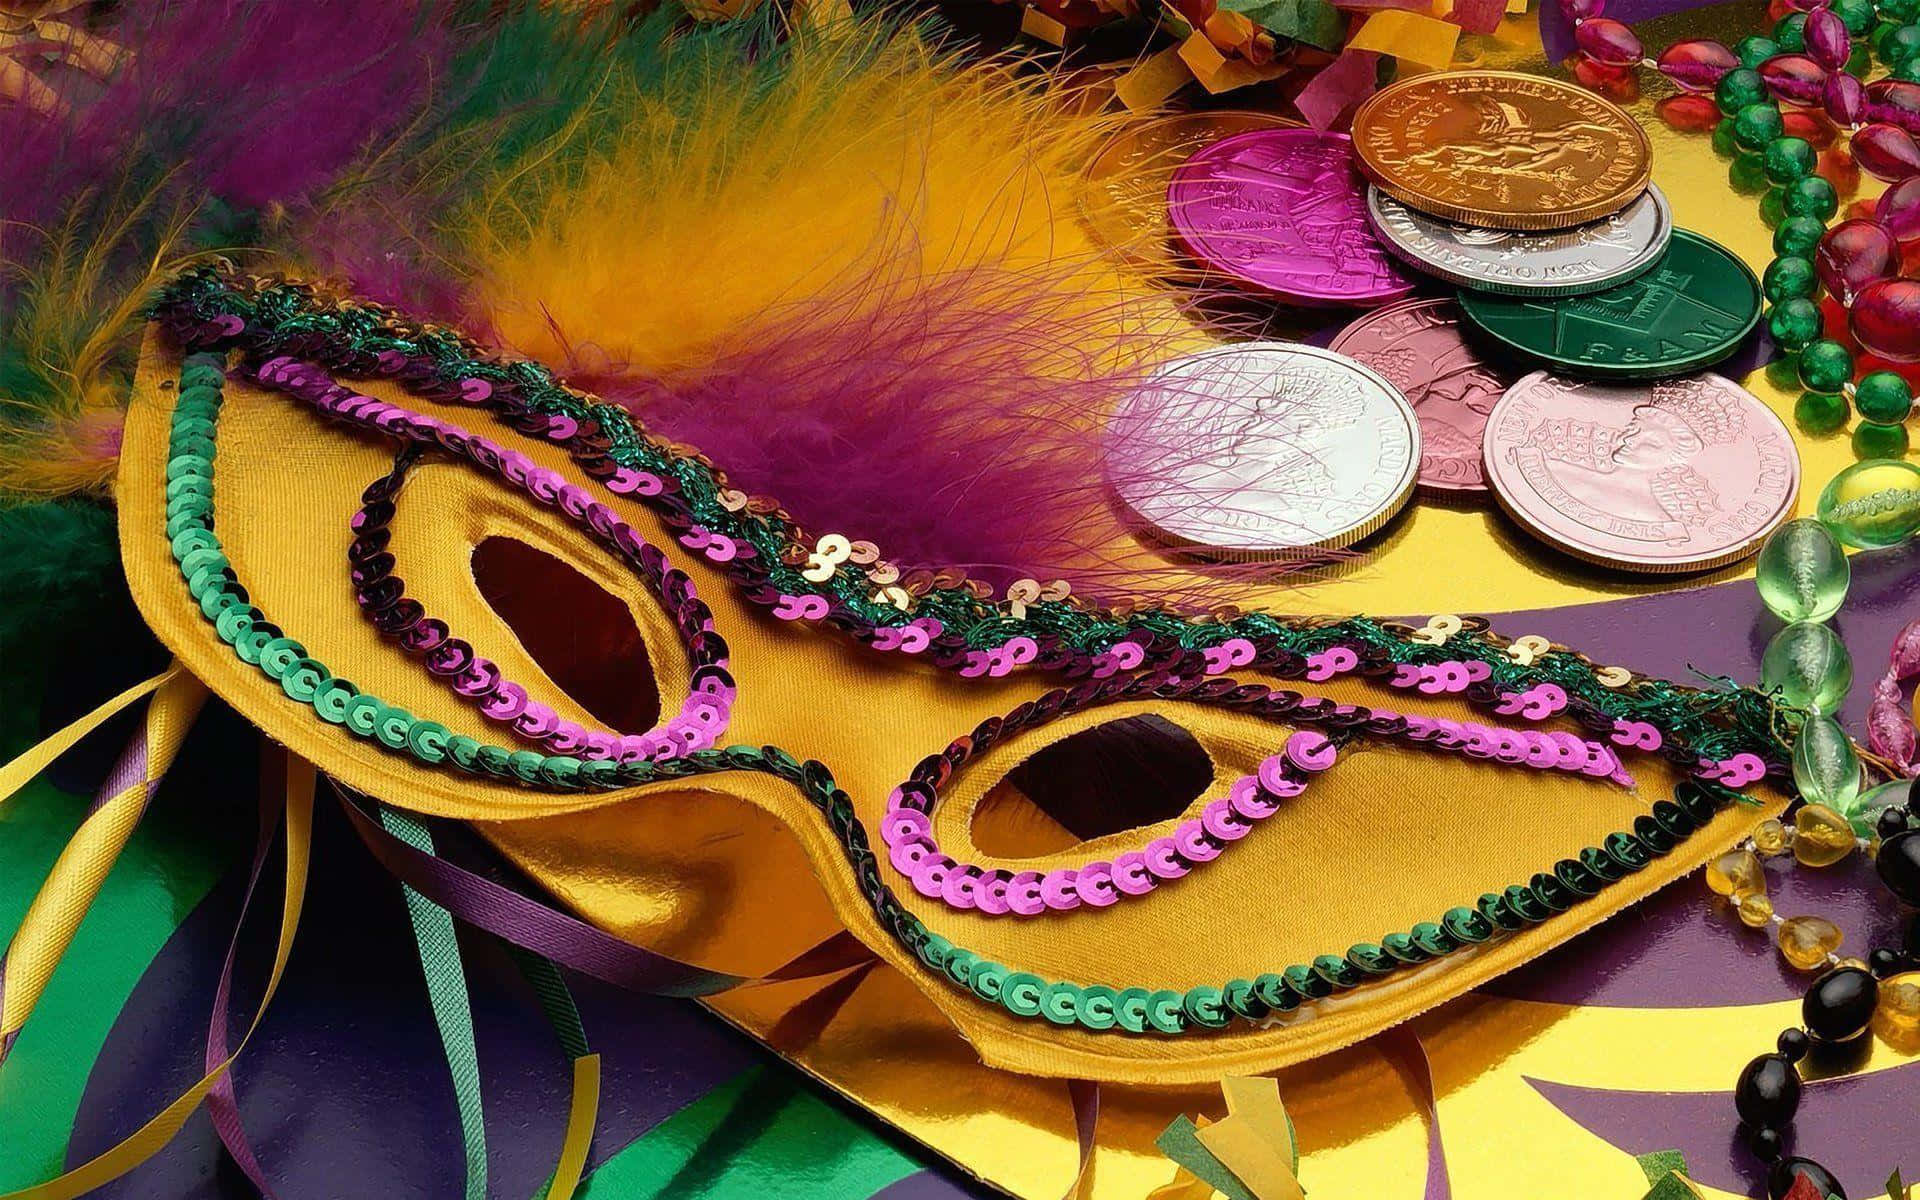 Celebrating Mardi Gras with Colorful Beads and Festive Music